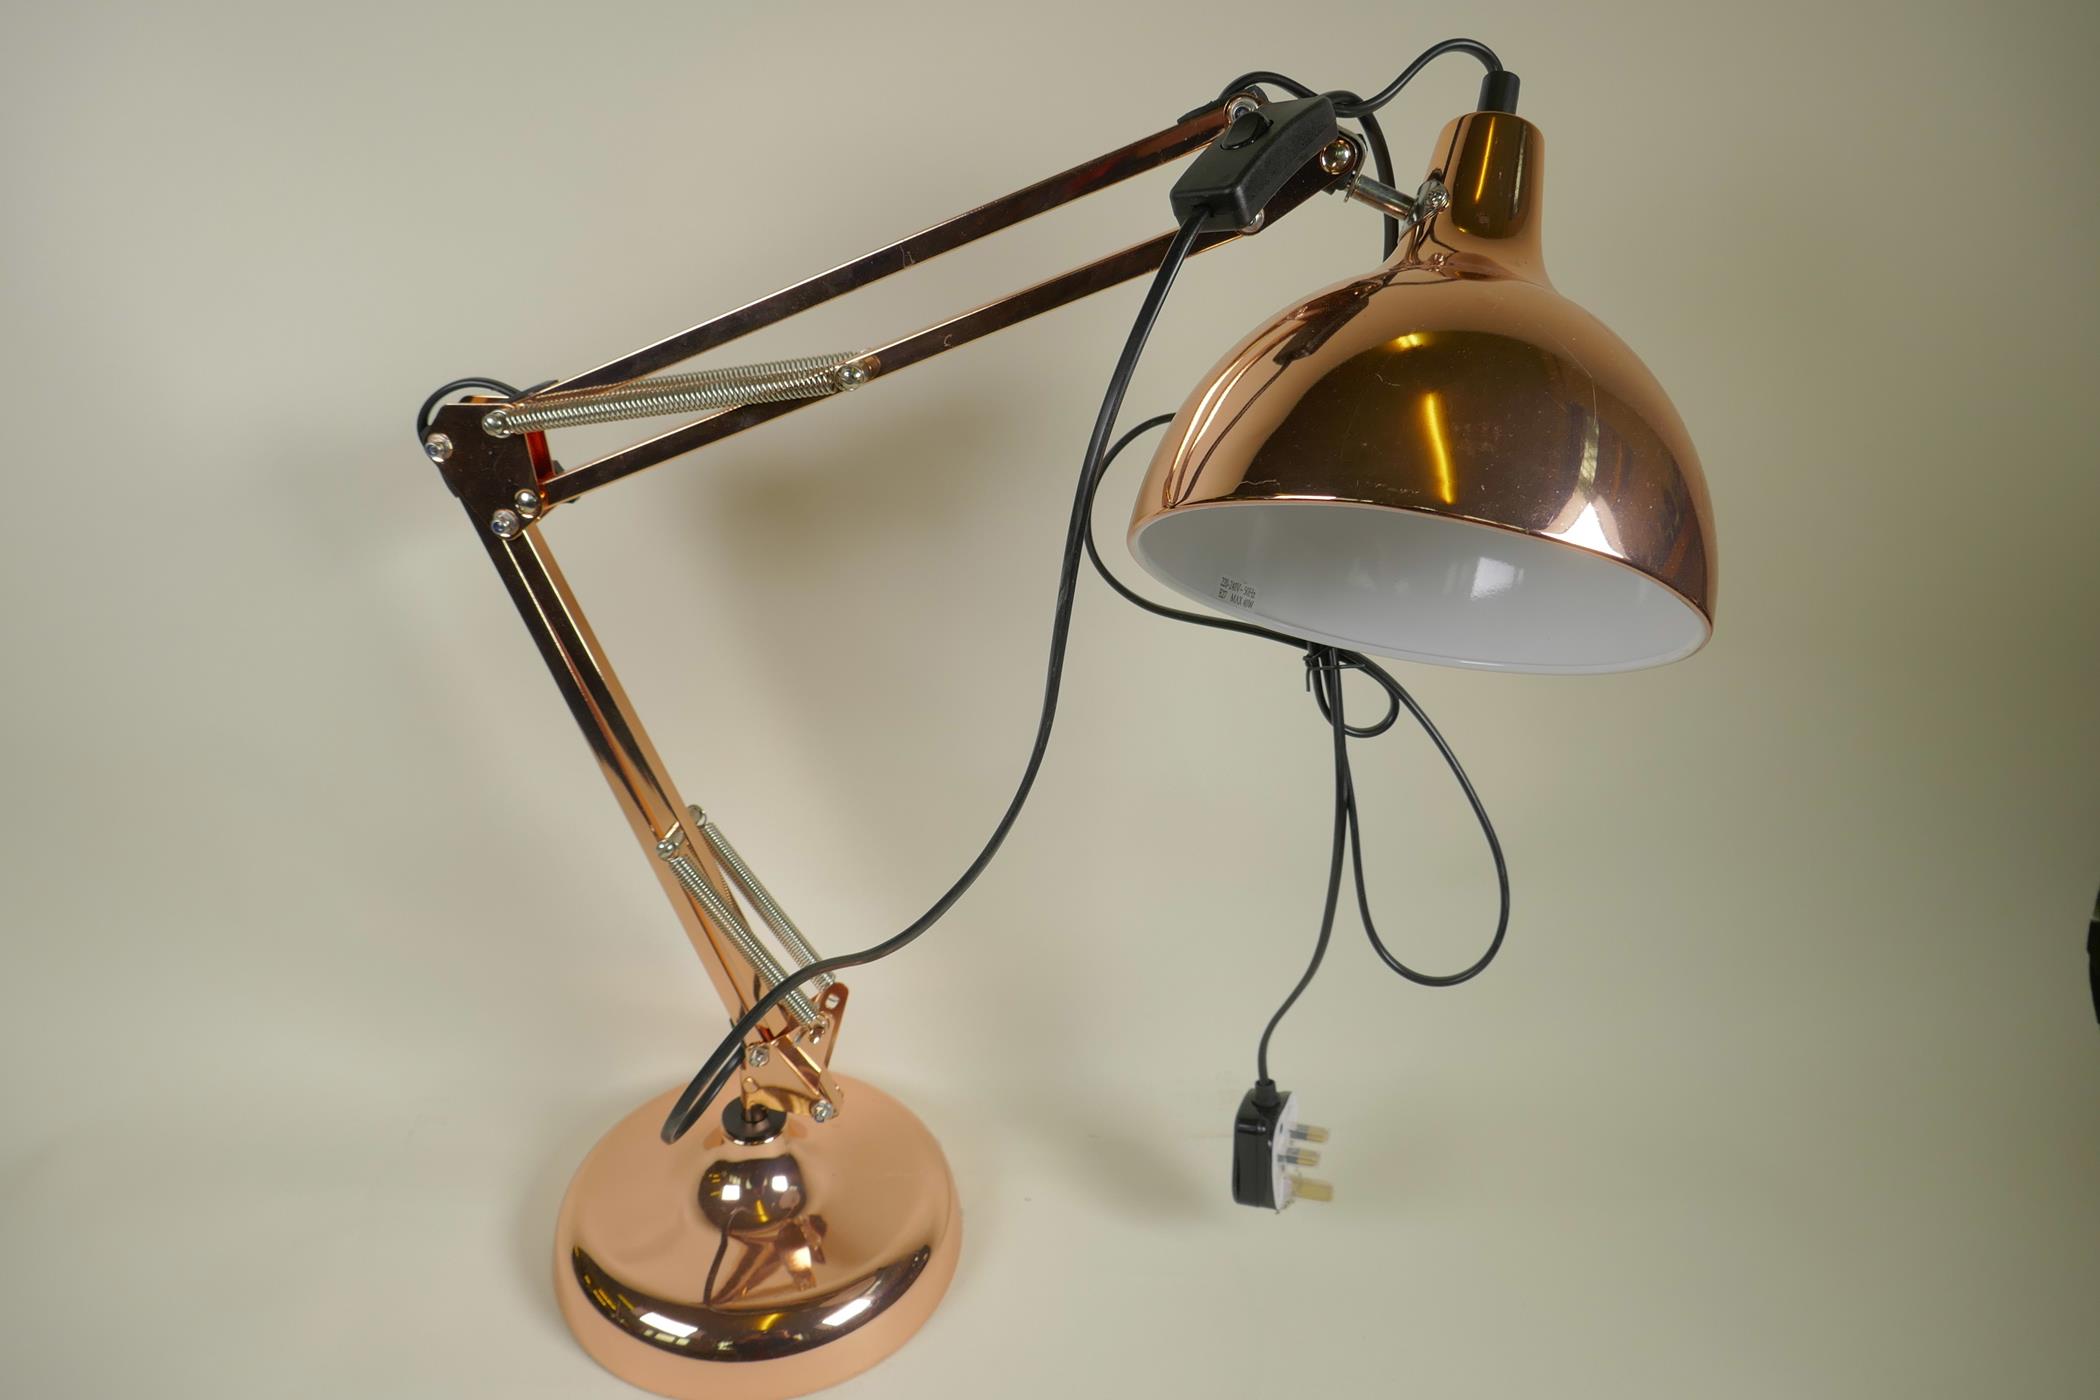 A copper plated Anglepoise style lamp, 26"